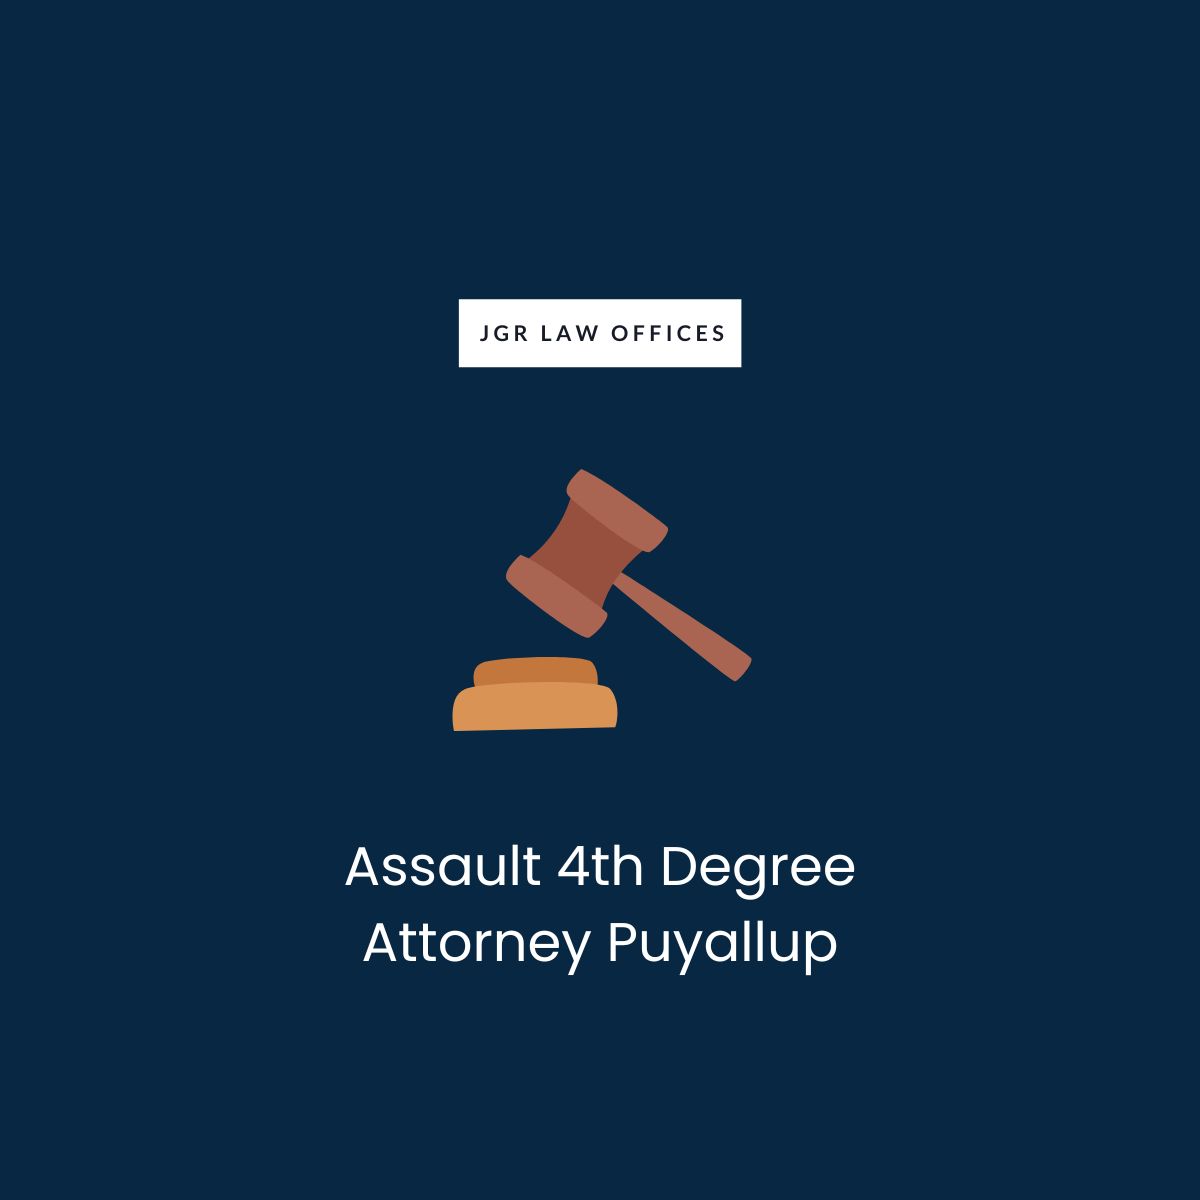 Assault 4th Degree Attorney Puyallup